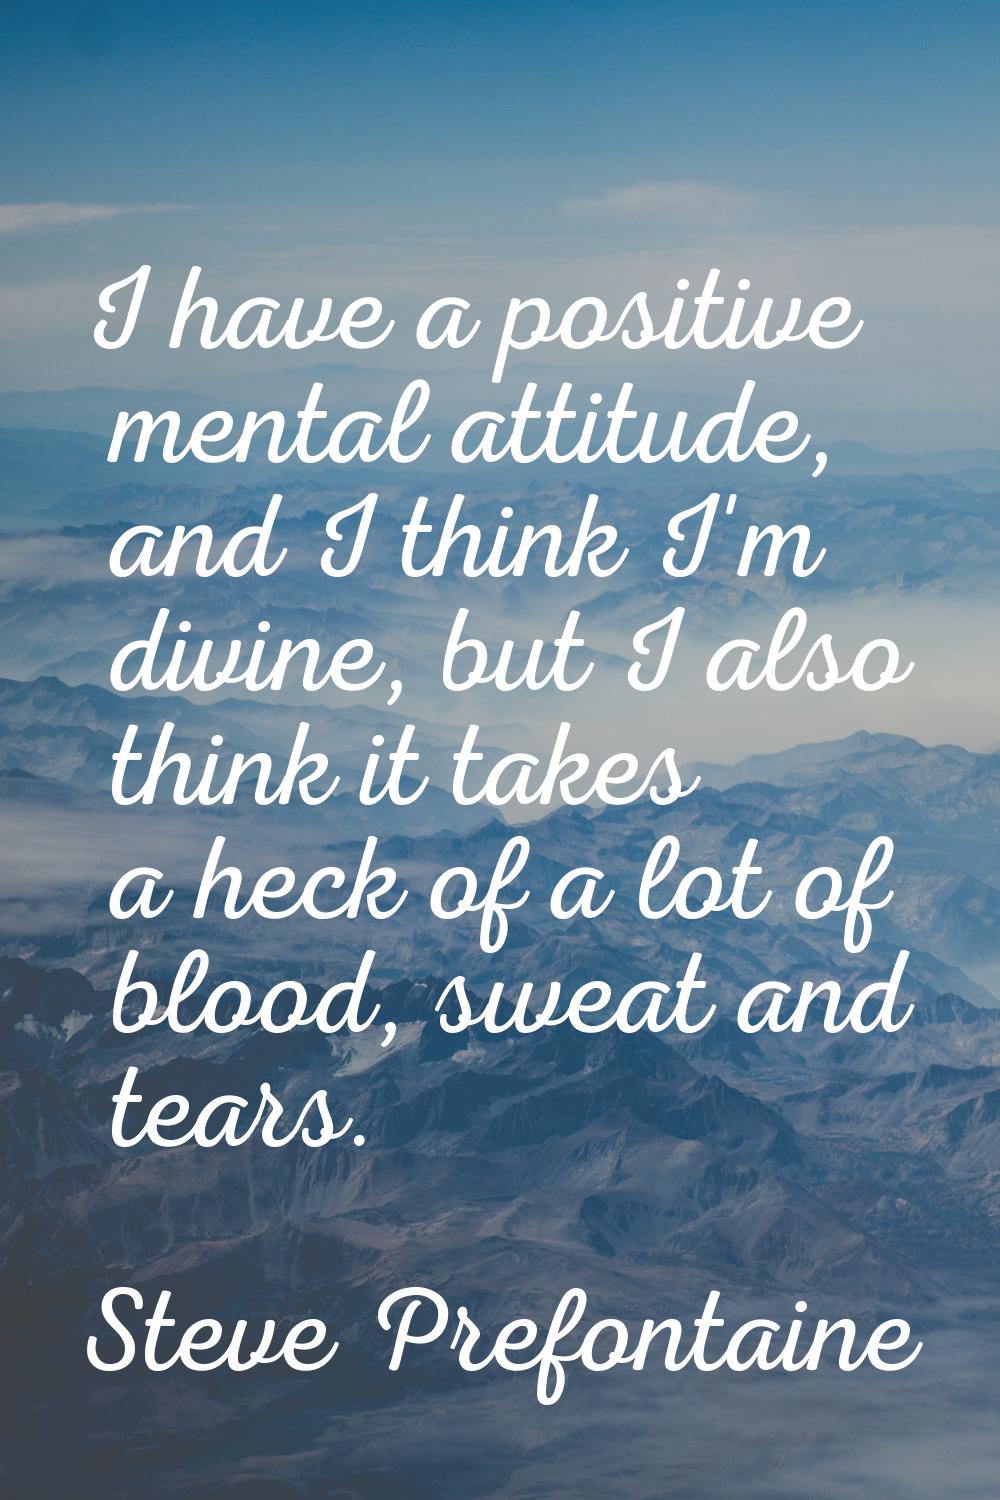 I have a positive mental attitude, and I think I'm divine, but I also think it takes a heck of a lo